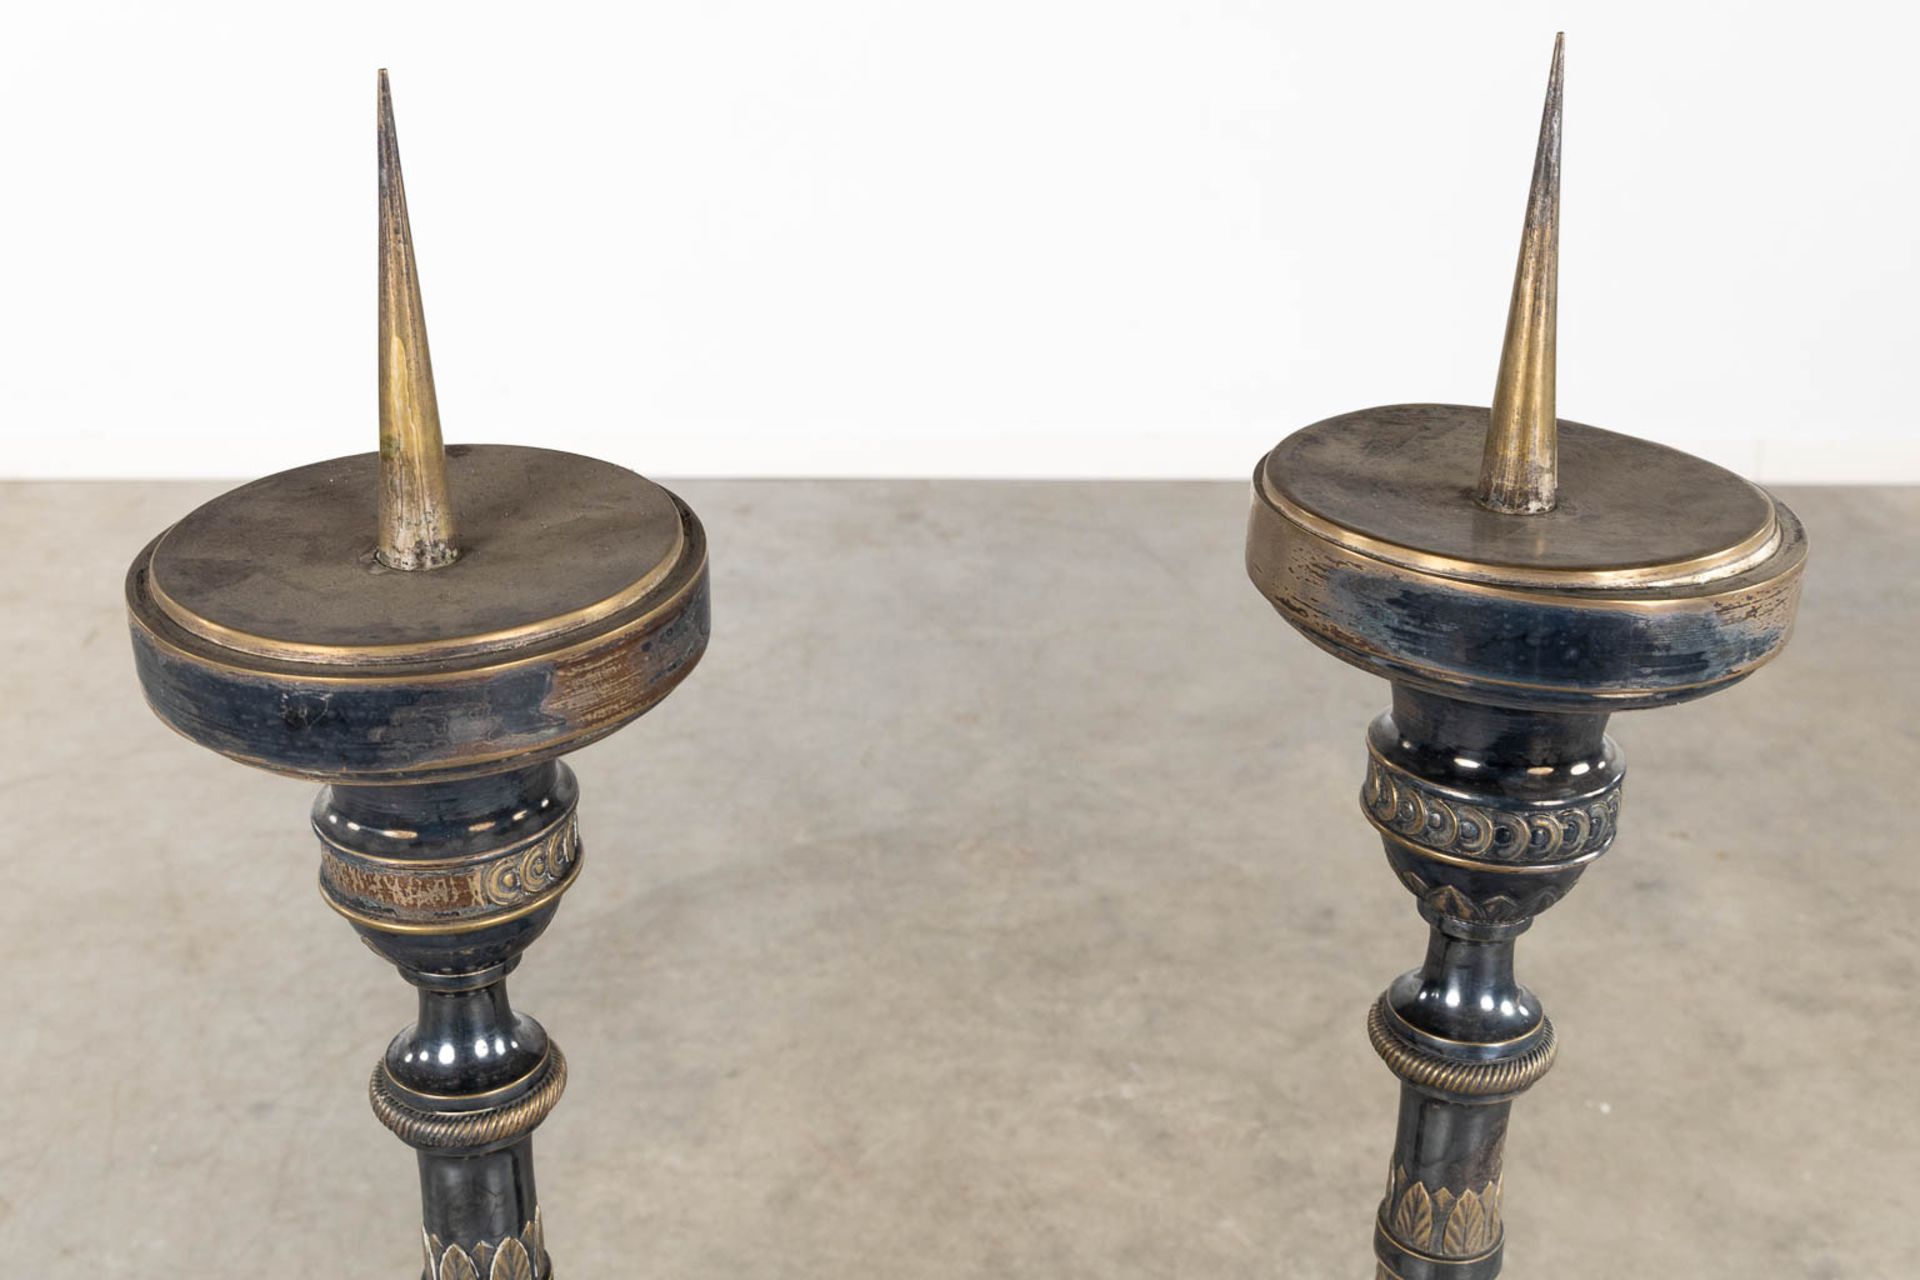 A pair of Church Candlesticks, silver- and gold-plated metal. 19th C. (H:120 cm) - Image 9 of 9